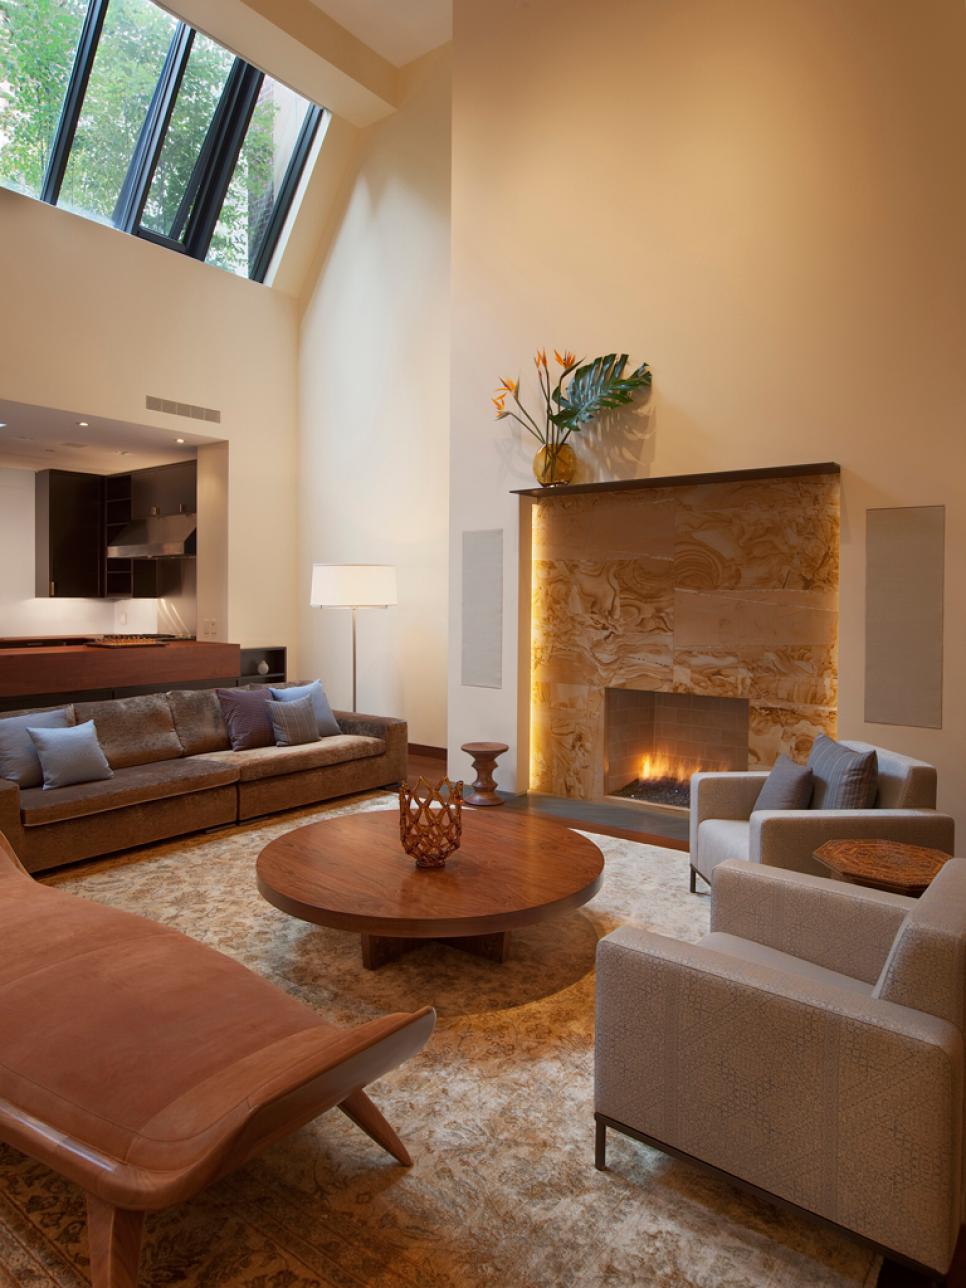 Modern Living Room With Stone Fireplace and High Ceiling | HGTV